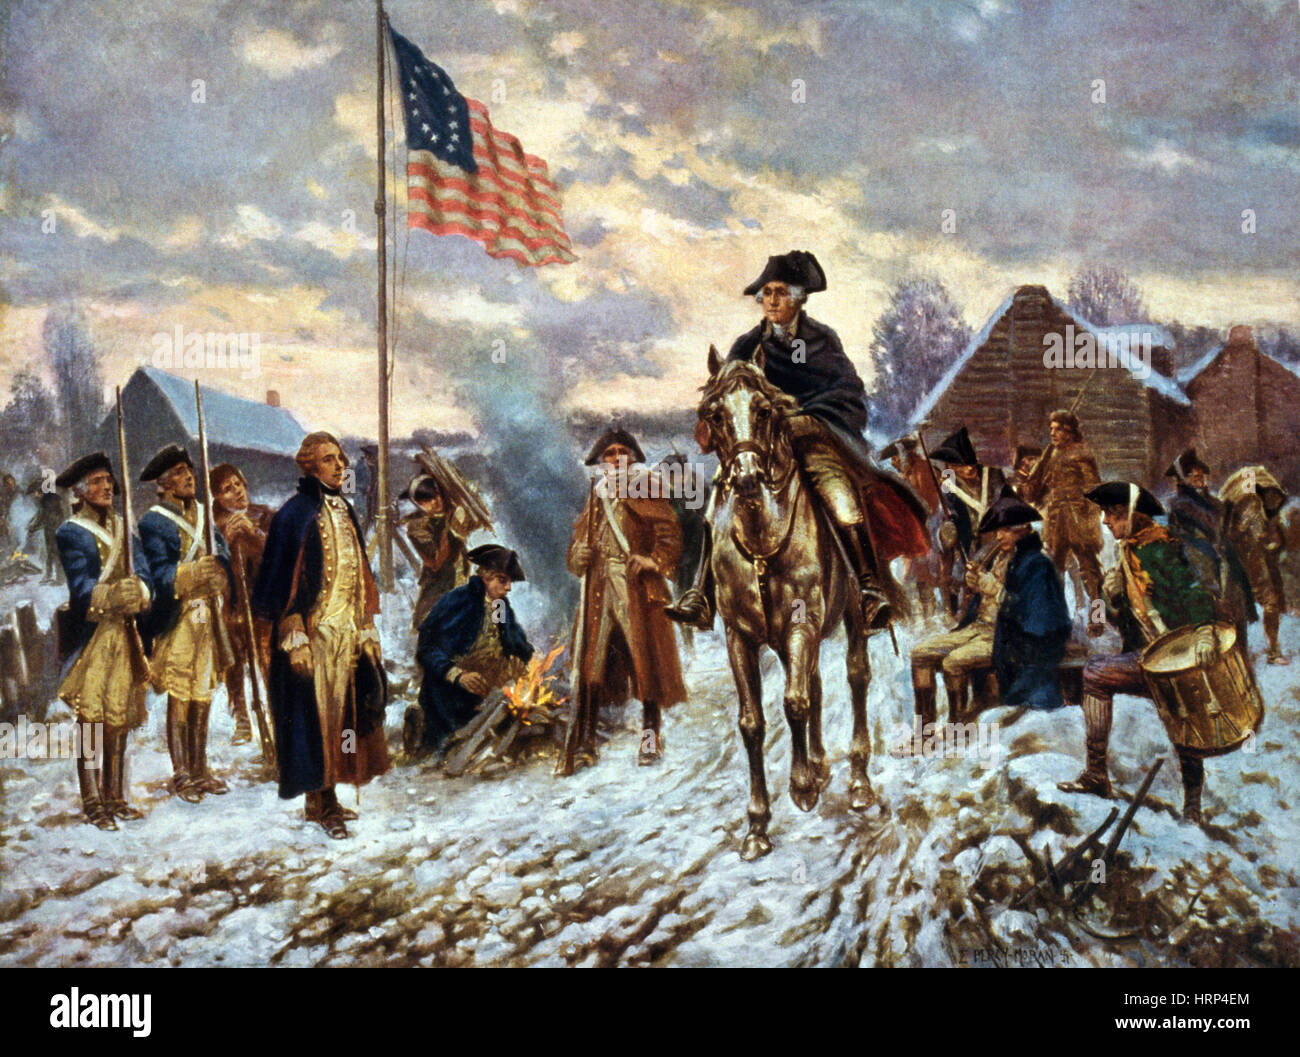 George Washington a Valley Forge, 1777-78 Foto Stock